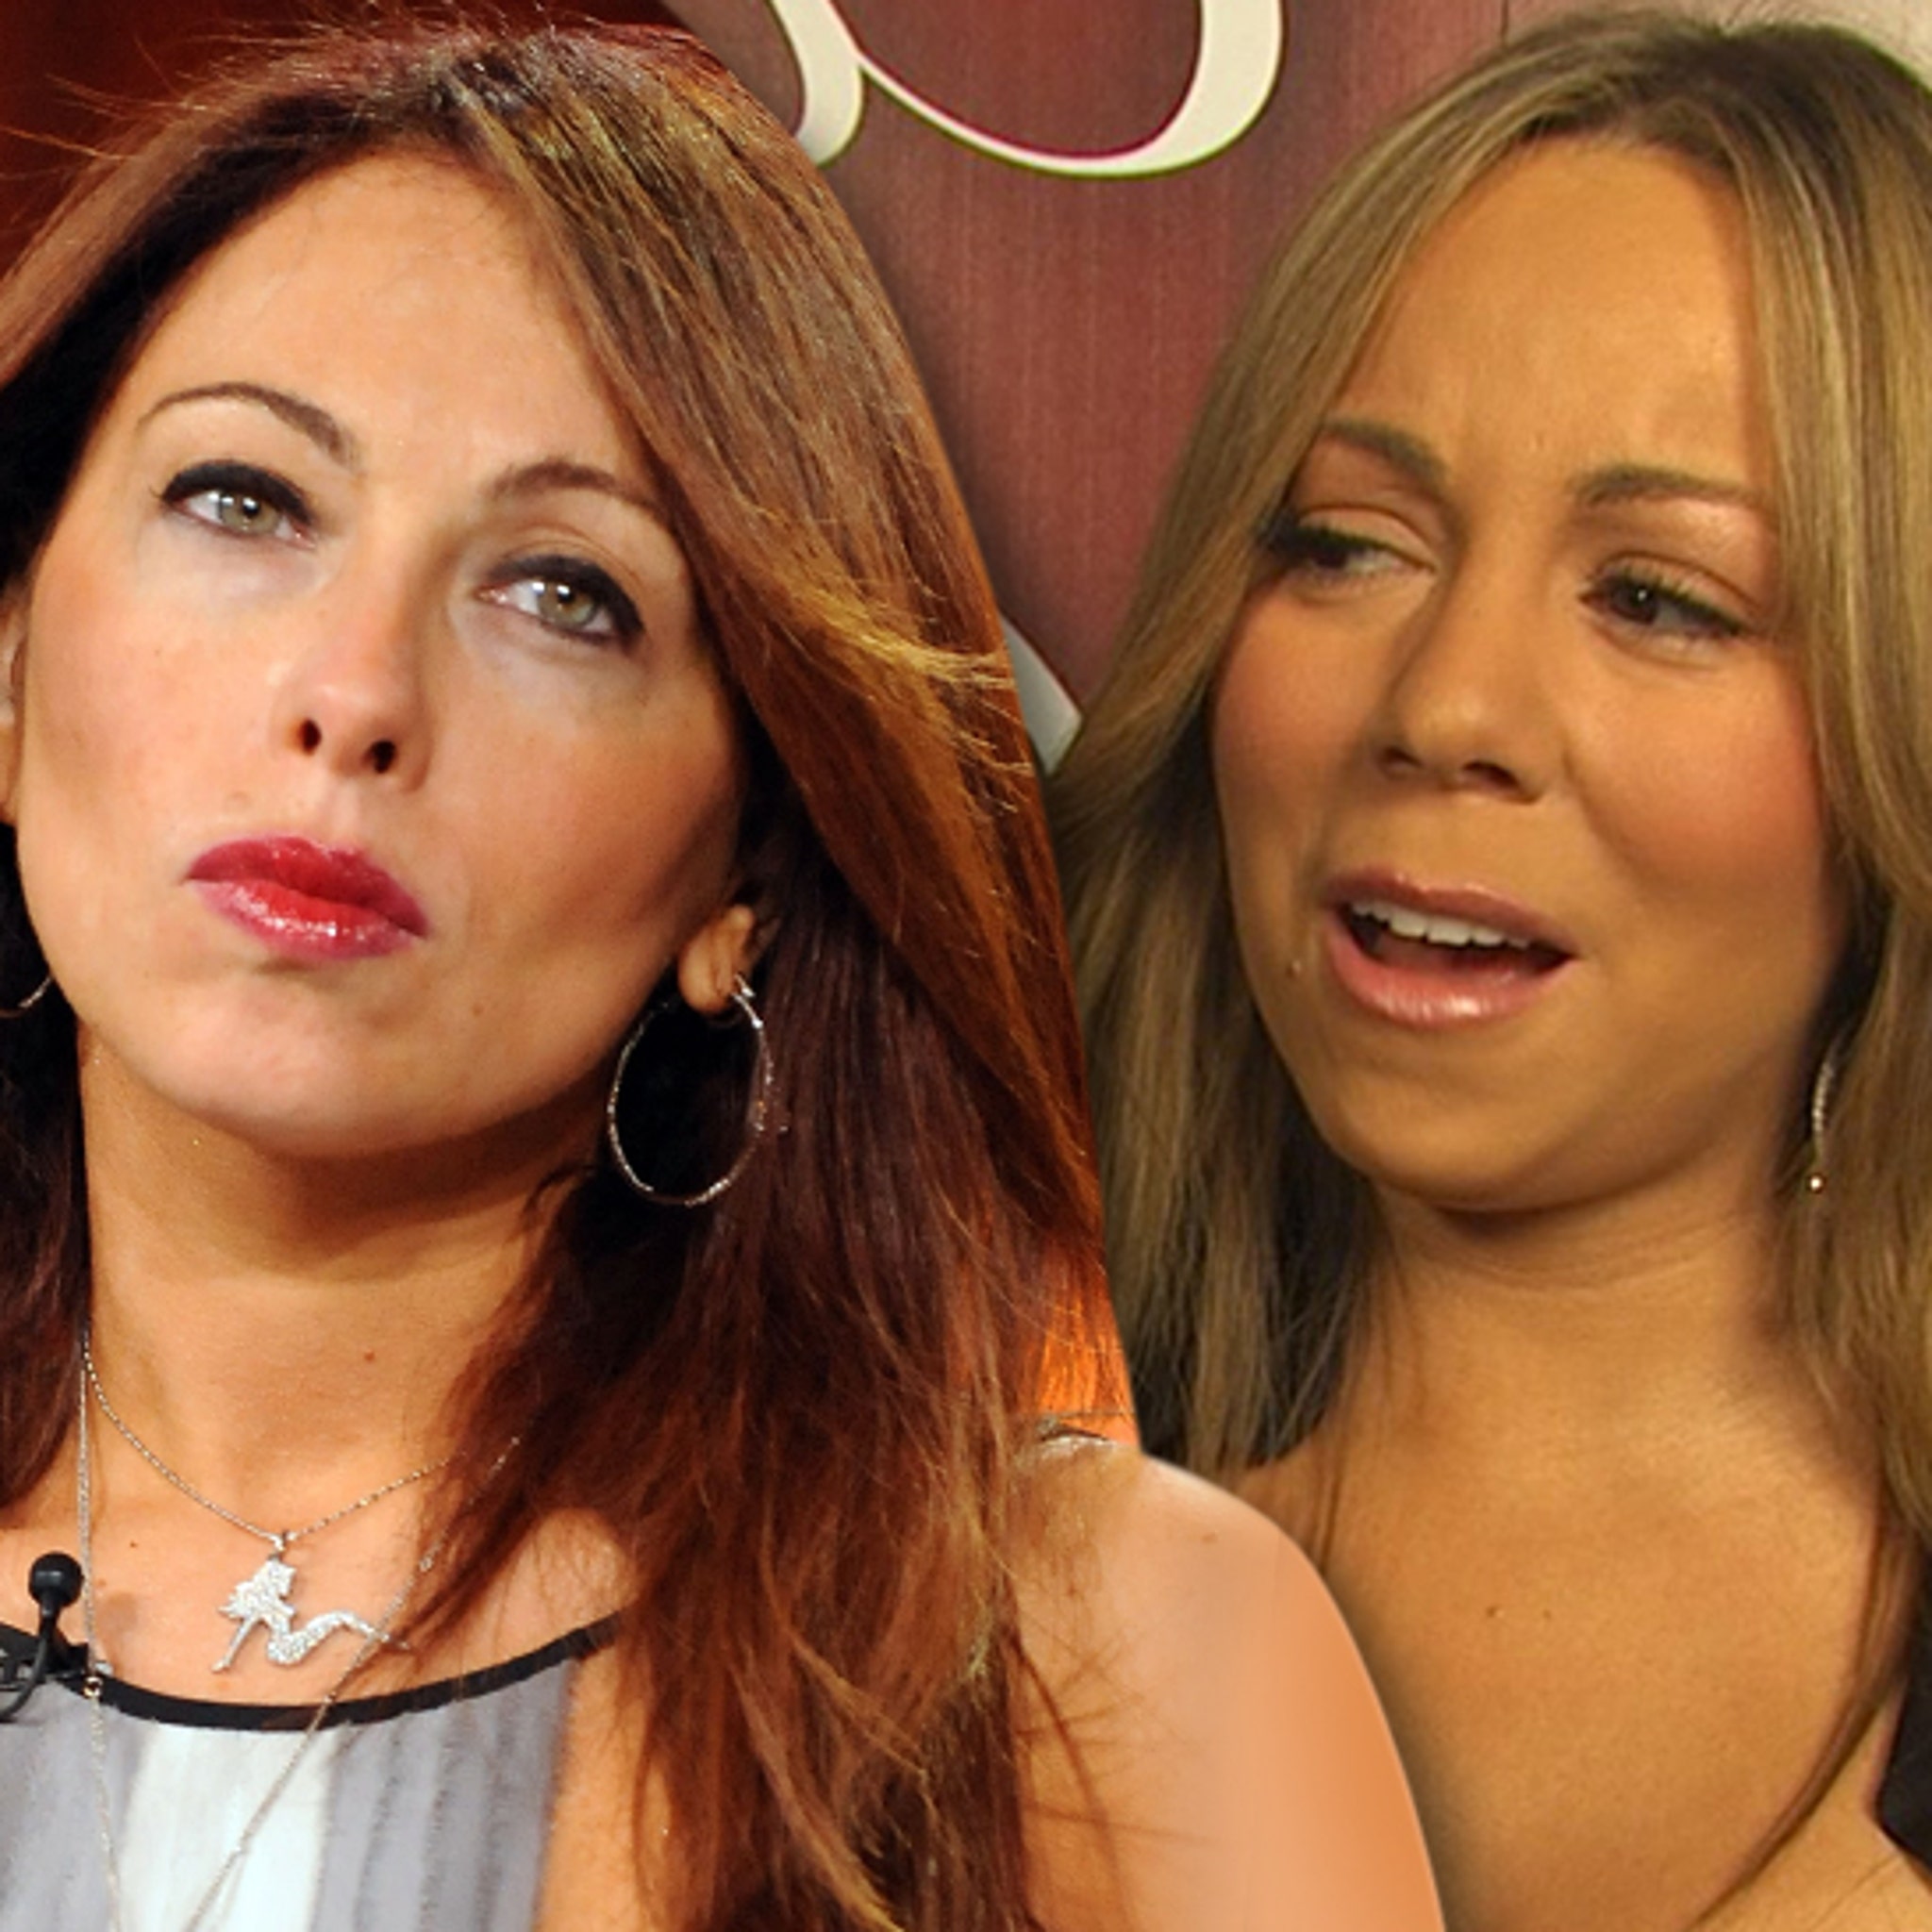 Mariah Careys Former Manager is Claiming Sexual Harassment photo